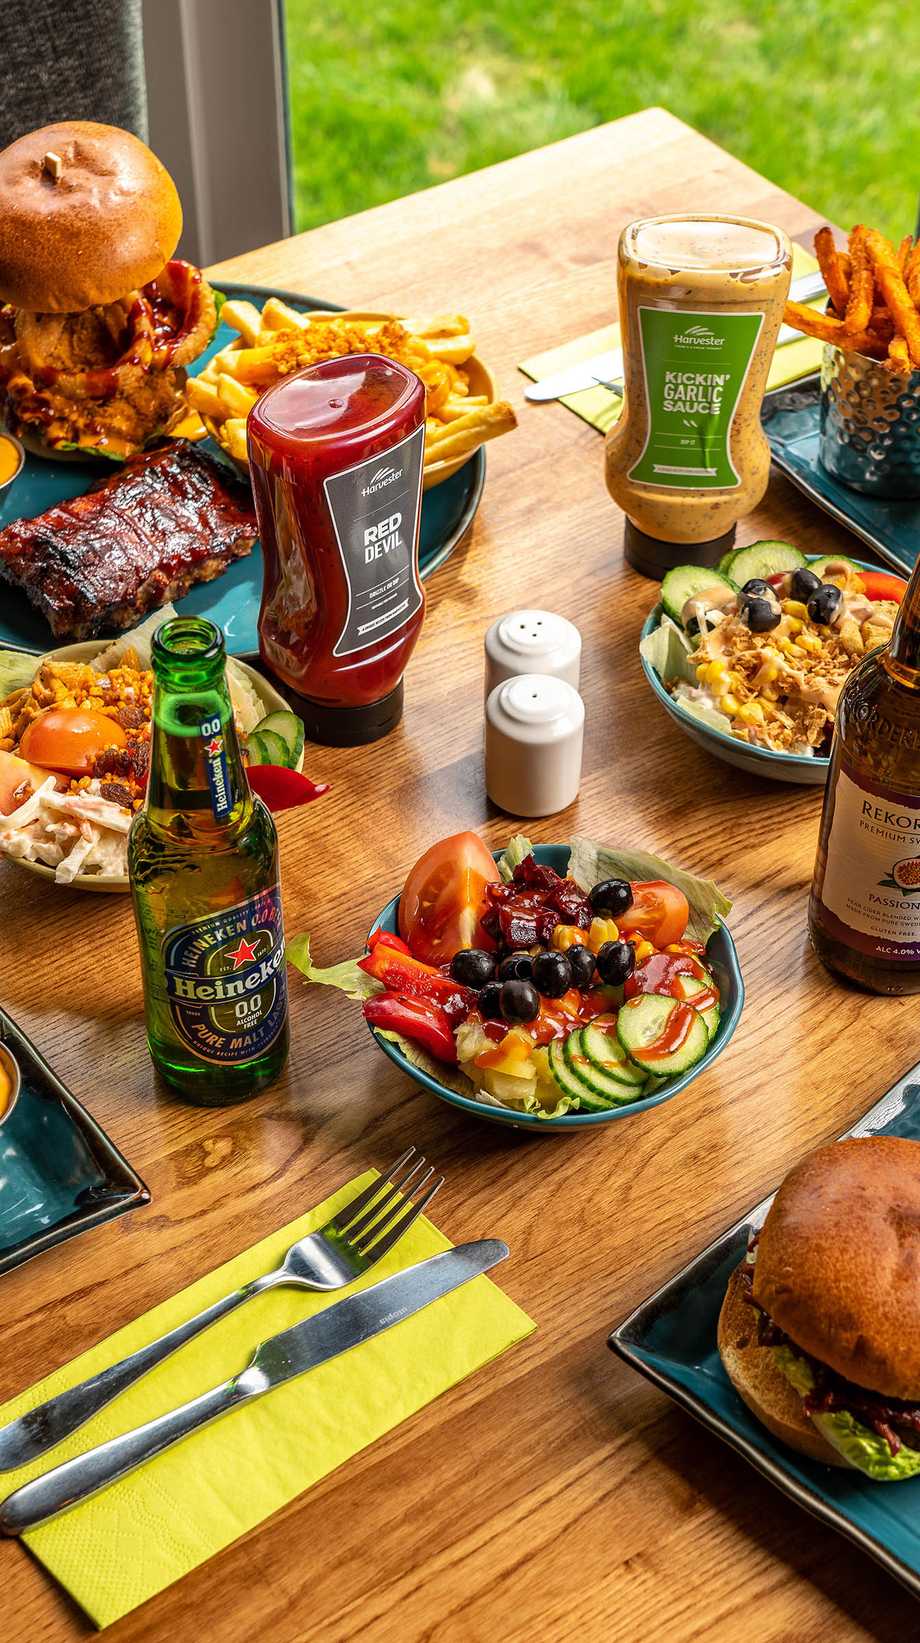 A table is covered with food and drinks, like burgers, salads, fries, and sauces.